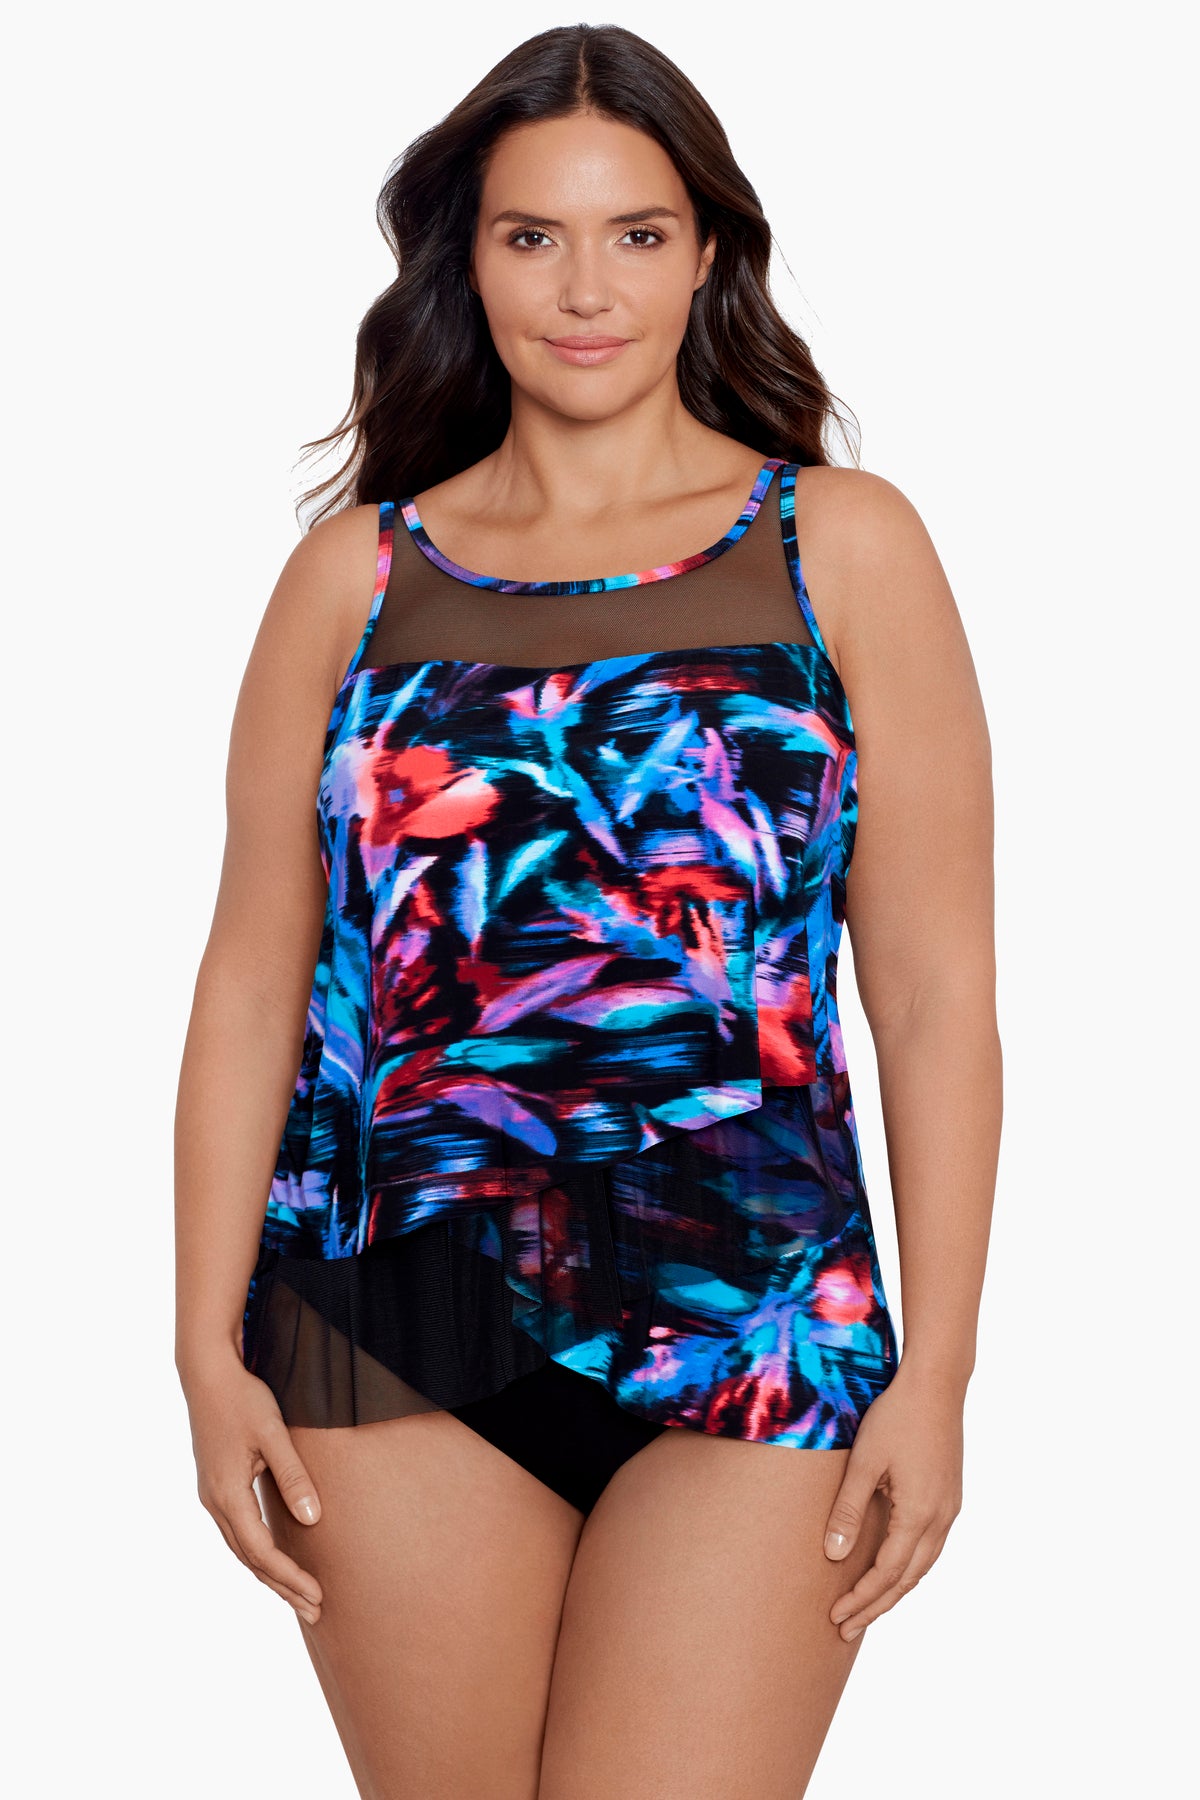 NKOOGH Shapermint Swimwear Bathing Suites Womens Extra Large Two Piece  Tankini Swimsuits for Women Floral Printed Tank Top With Boyshorts Bathing  Suits 